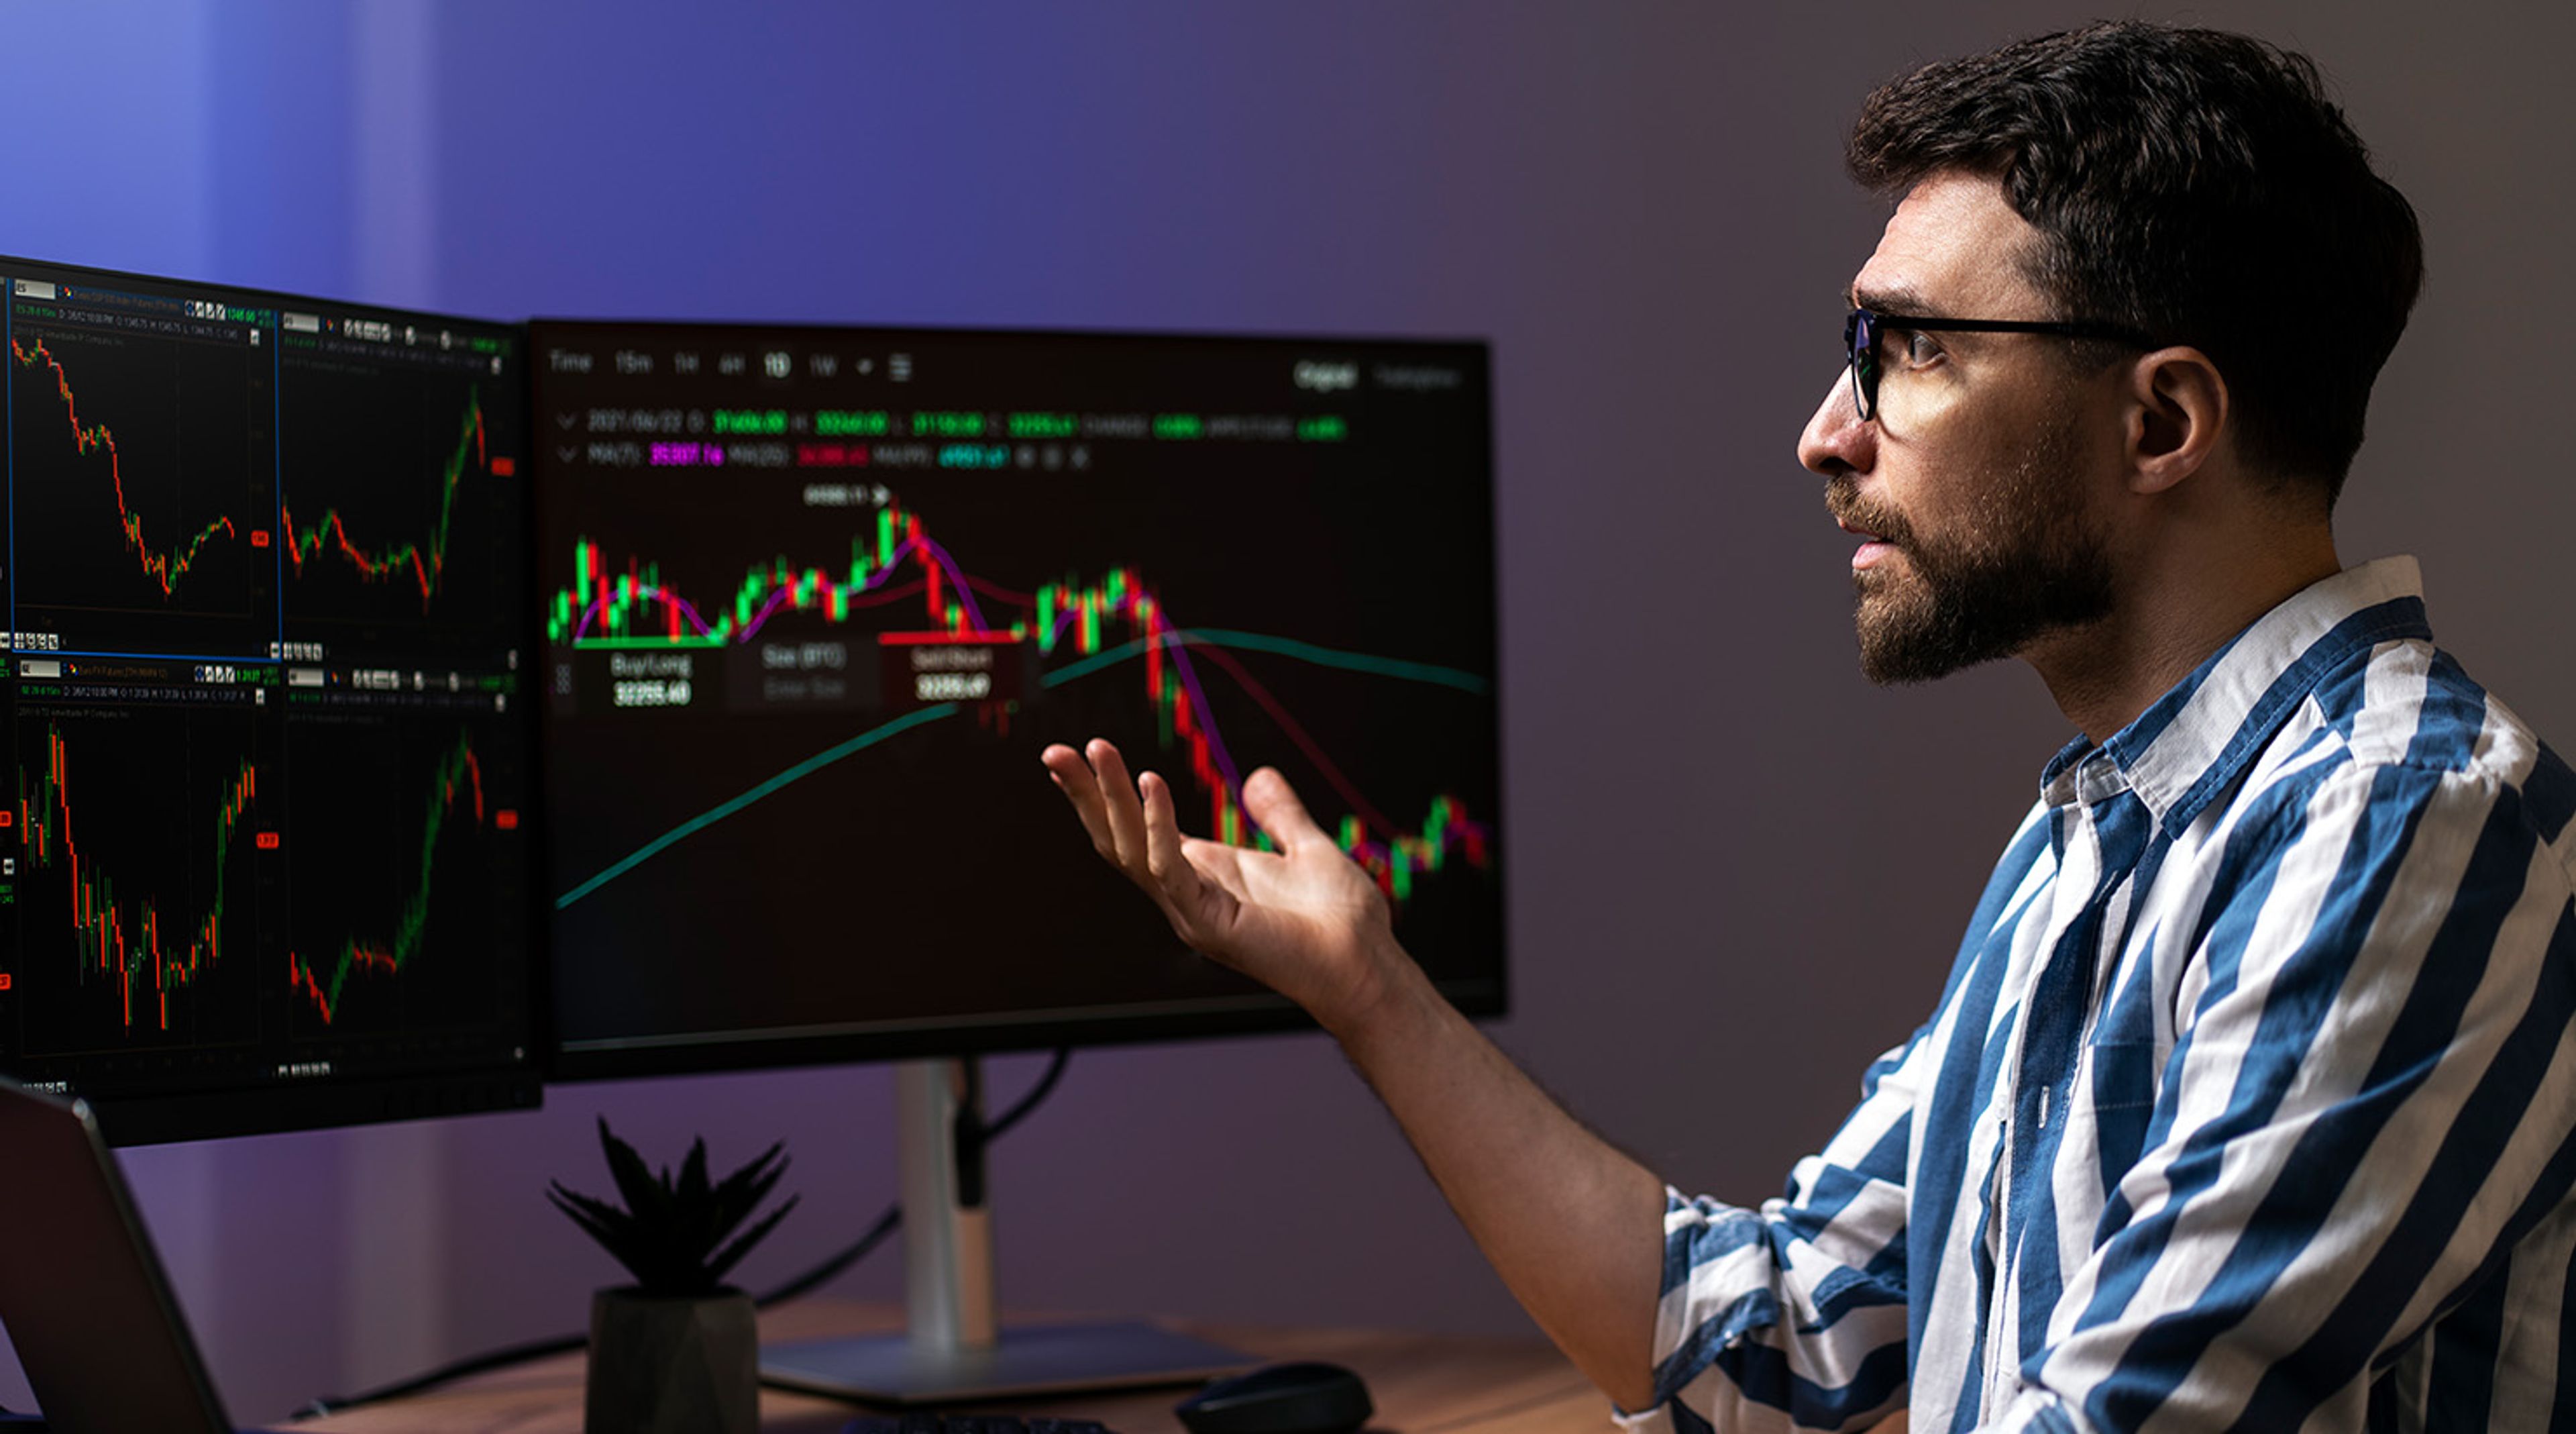 Trader getting frustrated with a volatile crypto market on screen